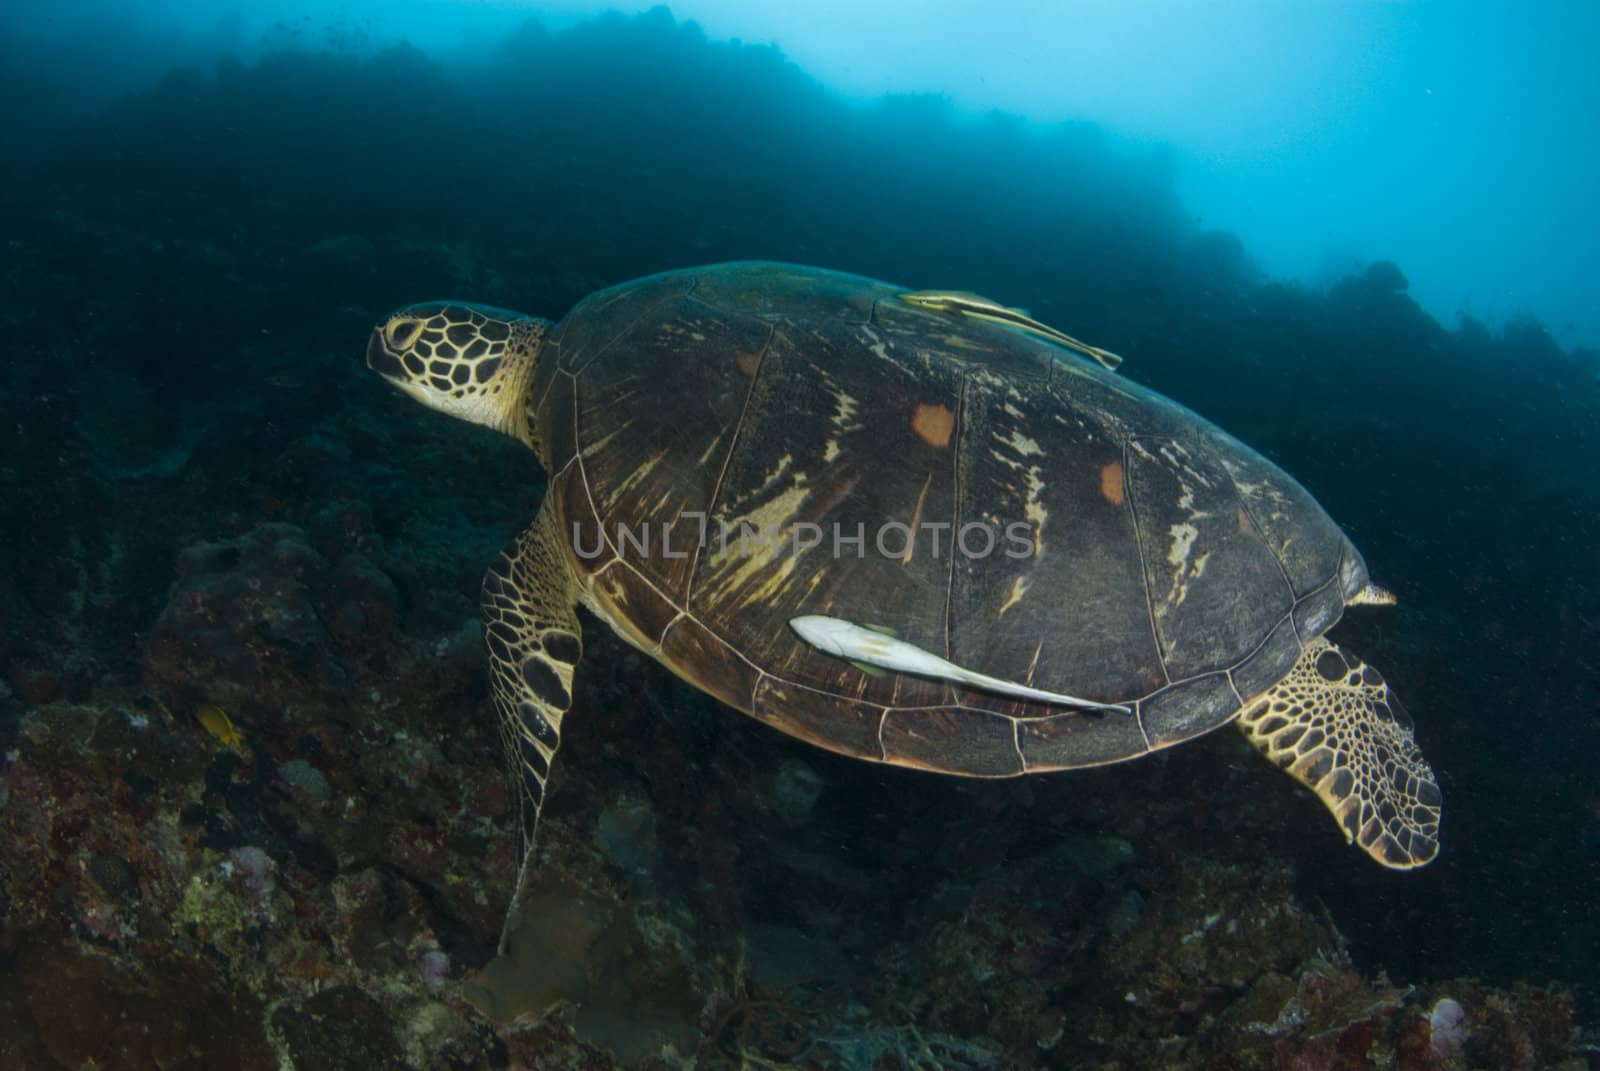 Swimming Green Sea Turtle (Chelonia mydas) with a remora underwater in the South China Sea